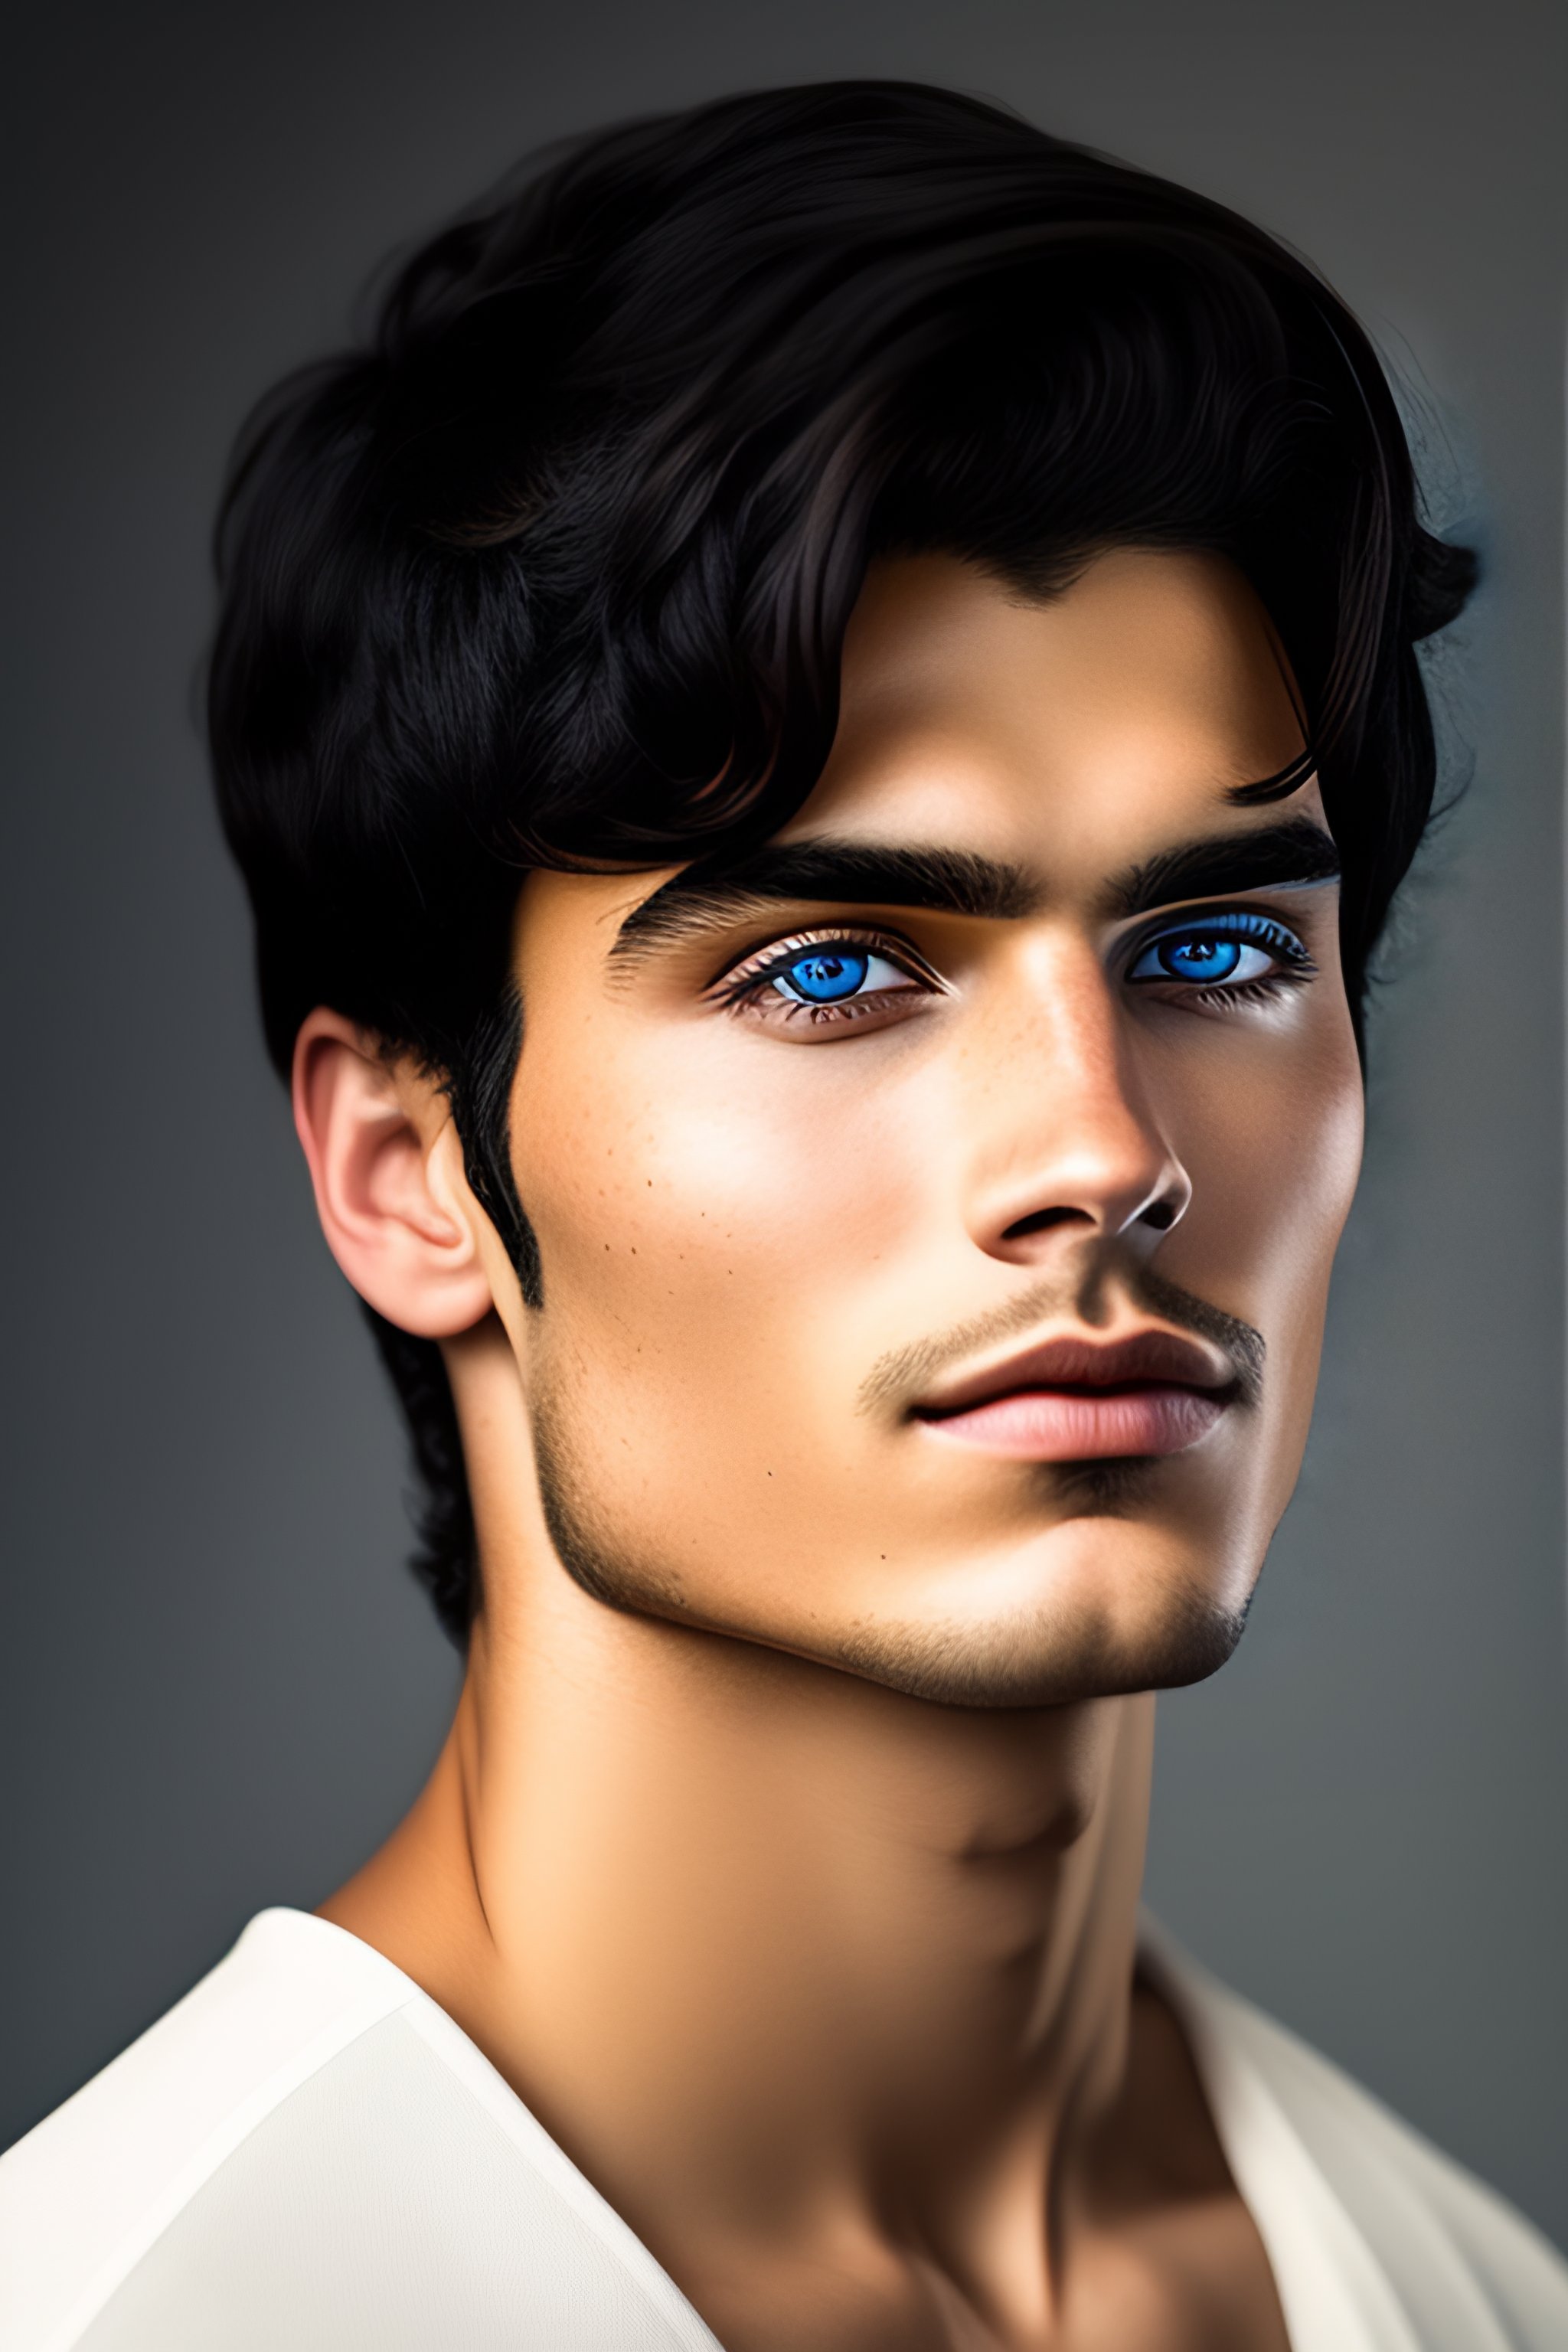 Lexica Portrait Of A 23 Year Old Man With Black Hair And Blue Eyes No Background